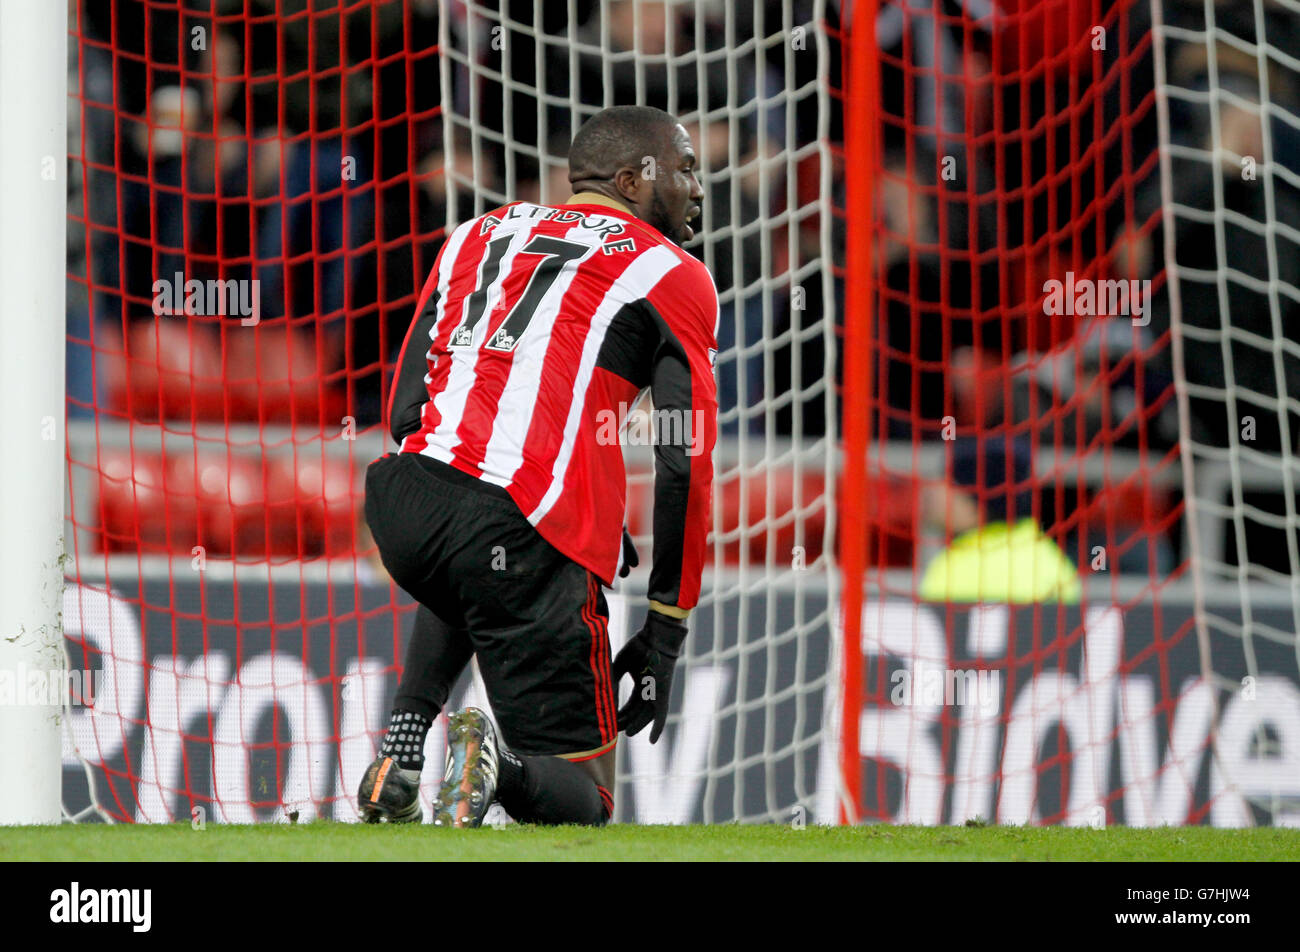 Sunderland's Jozy Altidore misses a chance during the Barclays Premier League match at the Stadium of Light, Sunderland. PRESS ASSOCIATION Photo. Picture date: Saturday December 13, 2014. See PA story SOCCER Sunderland. Photo credit should read Richard Sellers/PA Wire. Maximum 45 images during a match. No video emulation or promotion as 'live'. No use in games, competitions, merchandise, betting or single club/player services. No use with unofficial audio, video, data, fixtures or club/league logos. Stock Photo